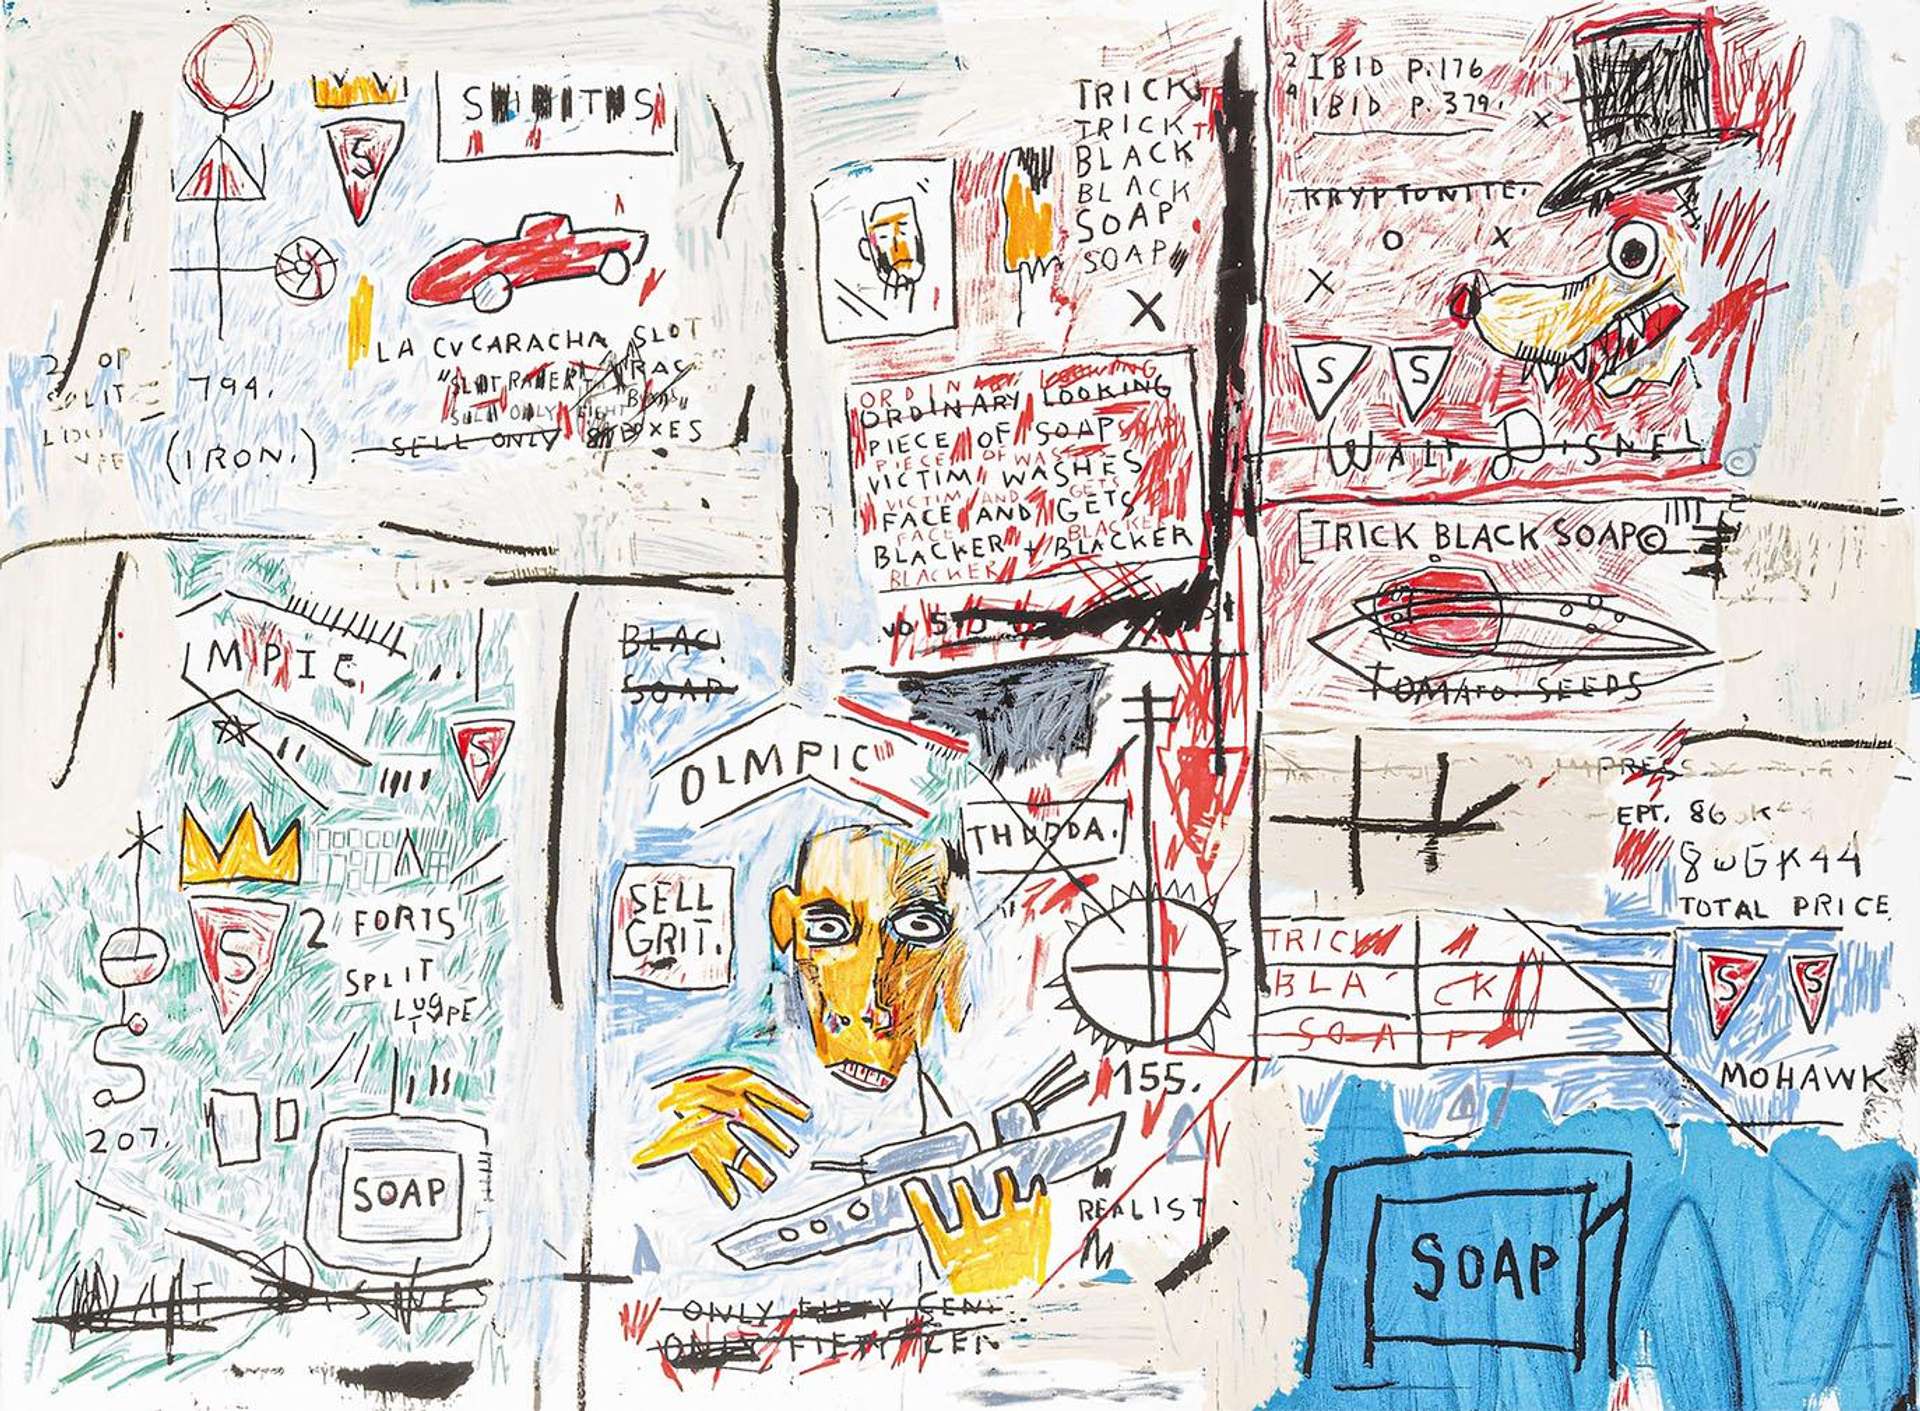 From Graffiti to Gallery: The Evolution of Basquiat's Artistic Style, MyArtBroker